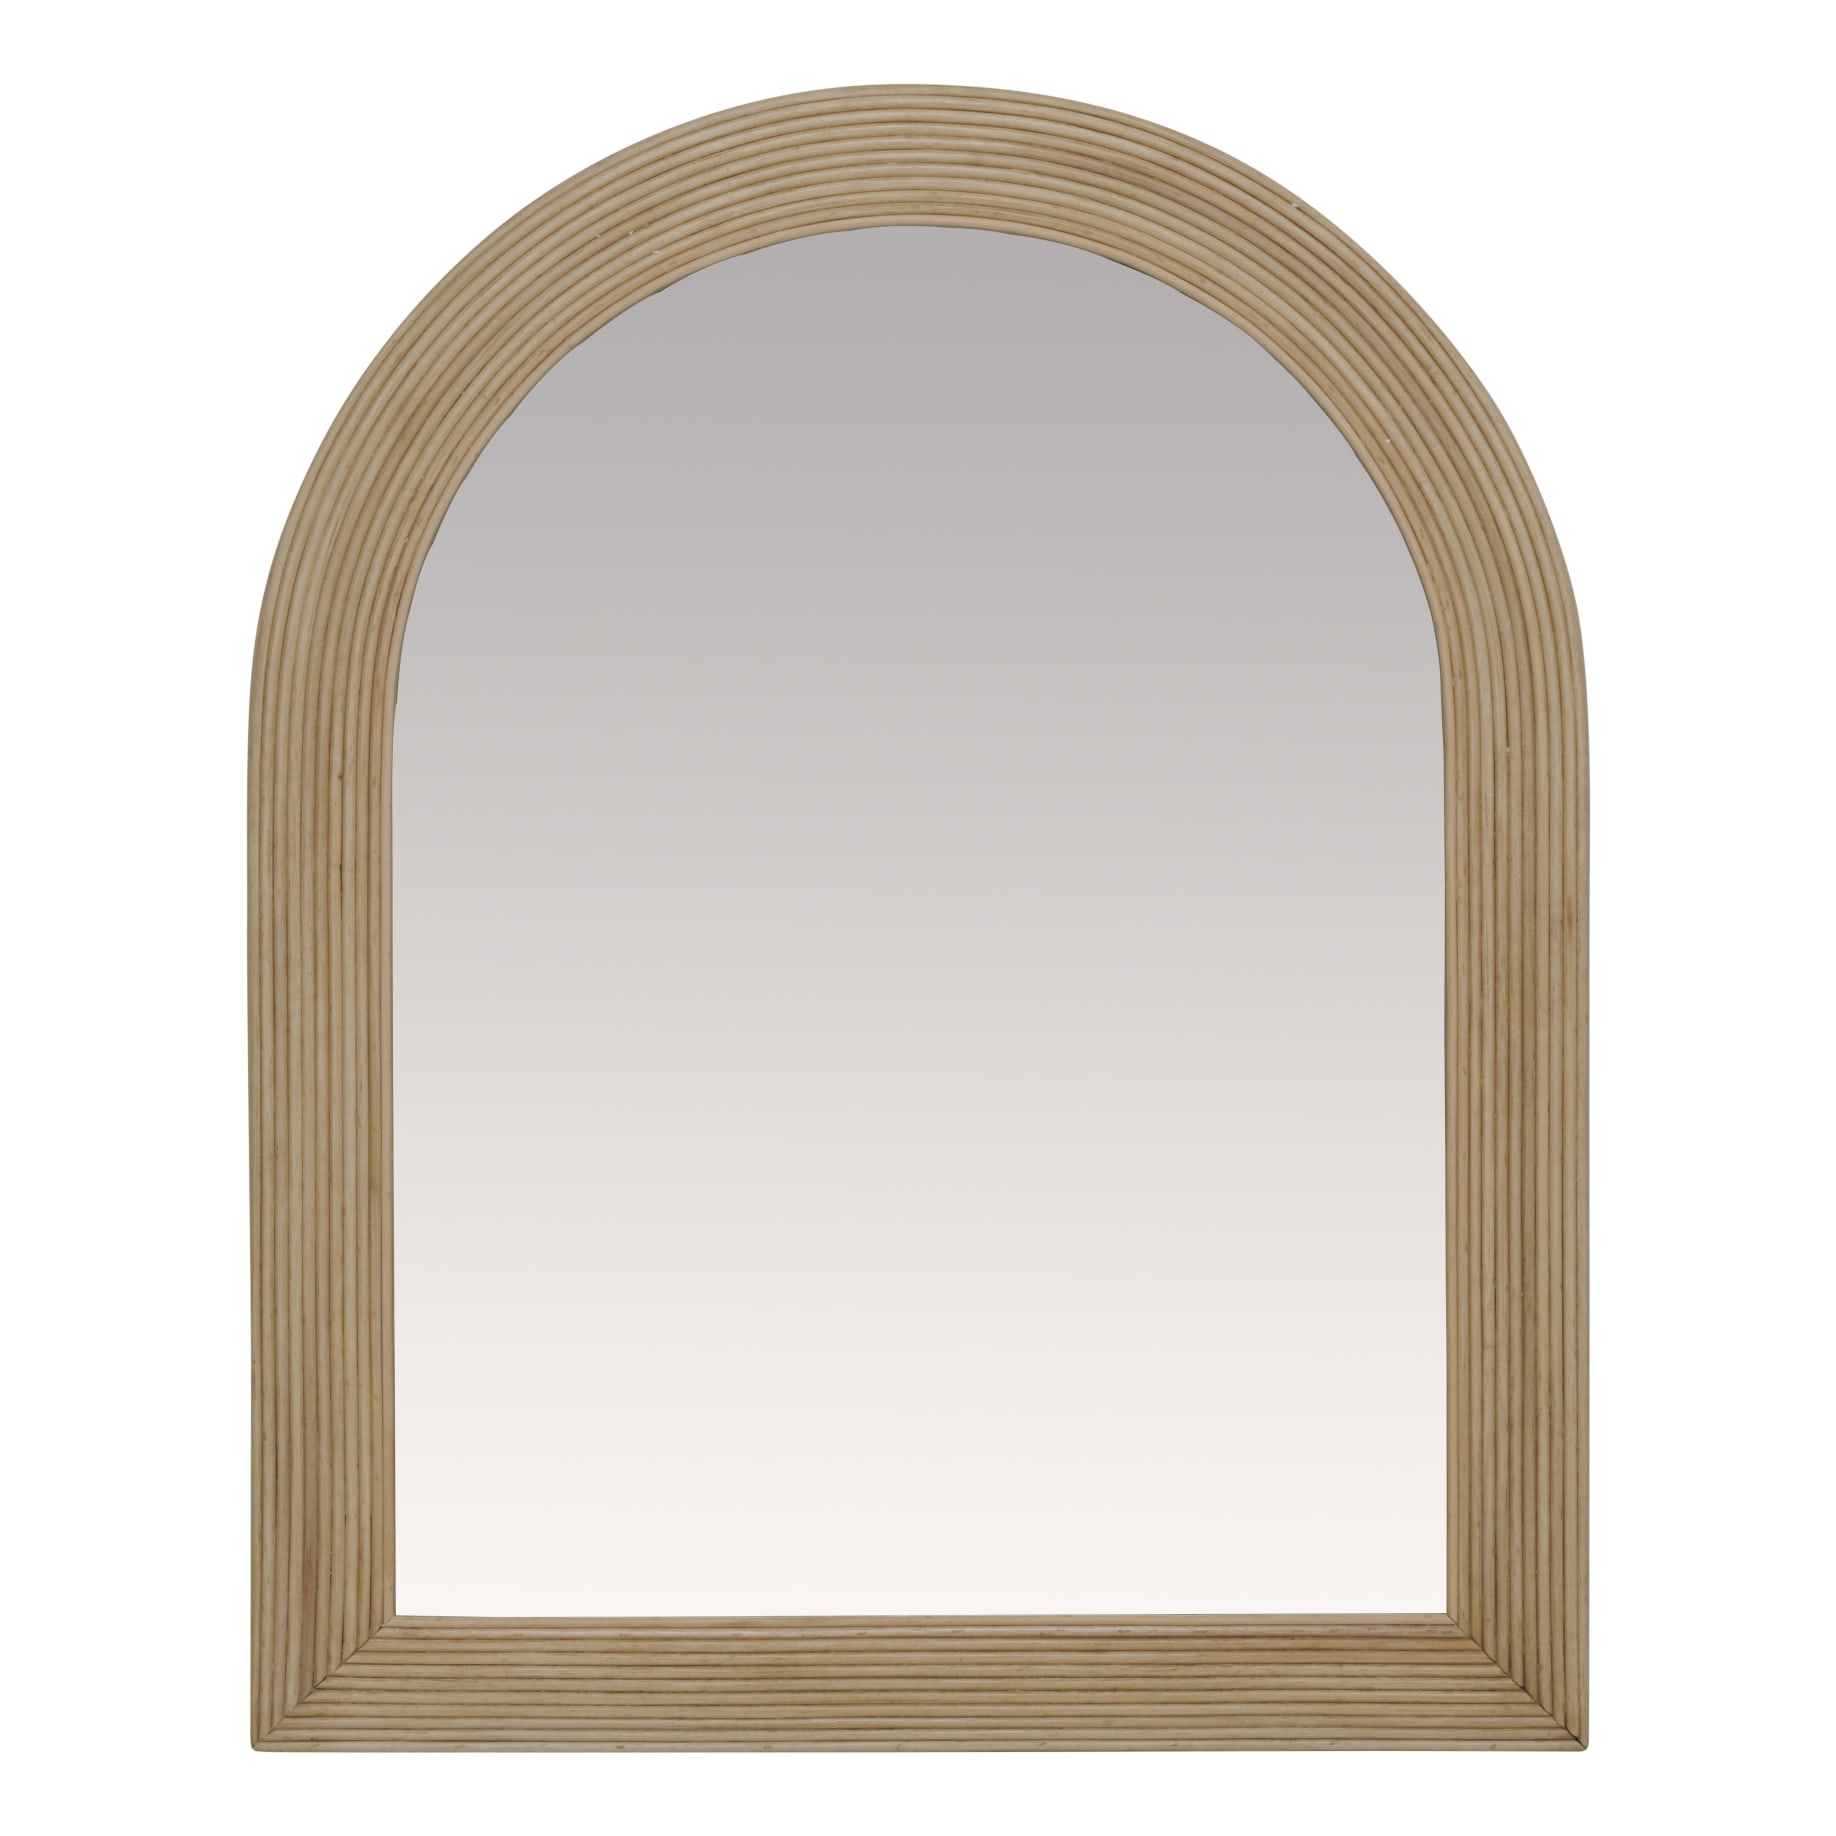 Airlie Mirror 80x100cm in Natural Rattan